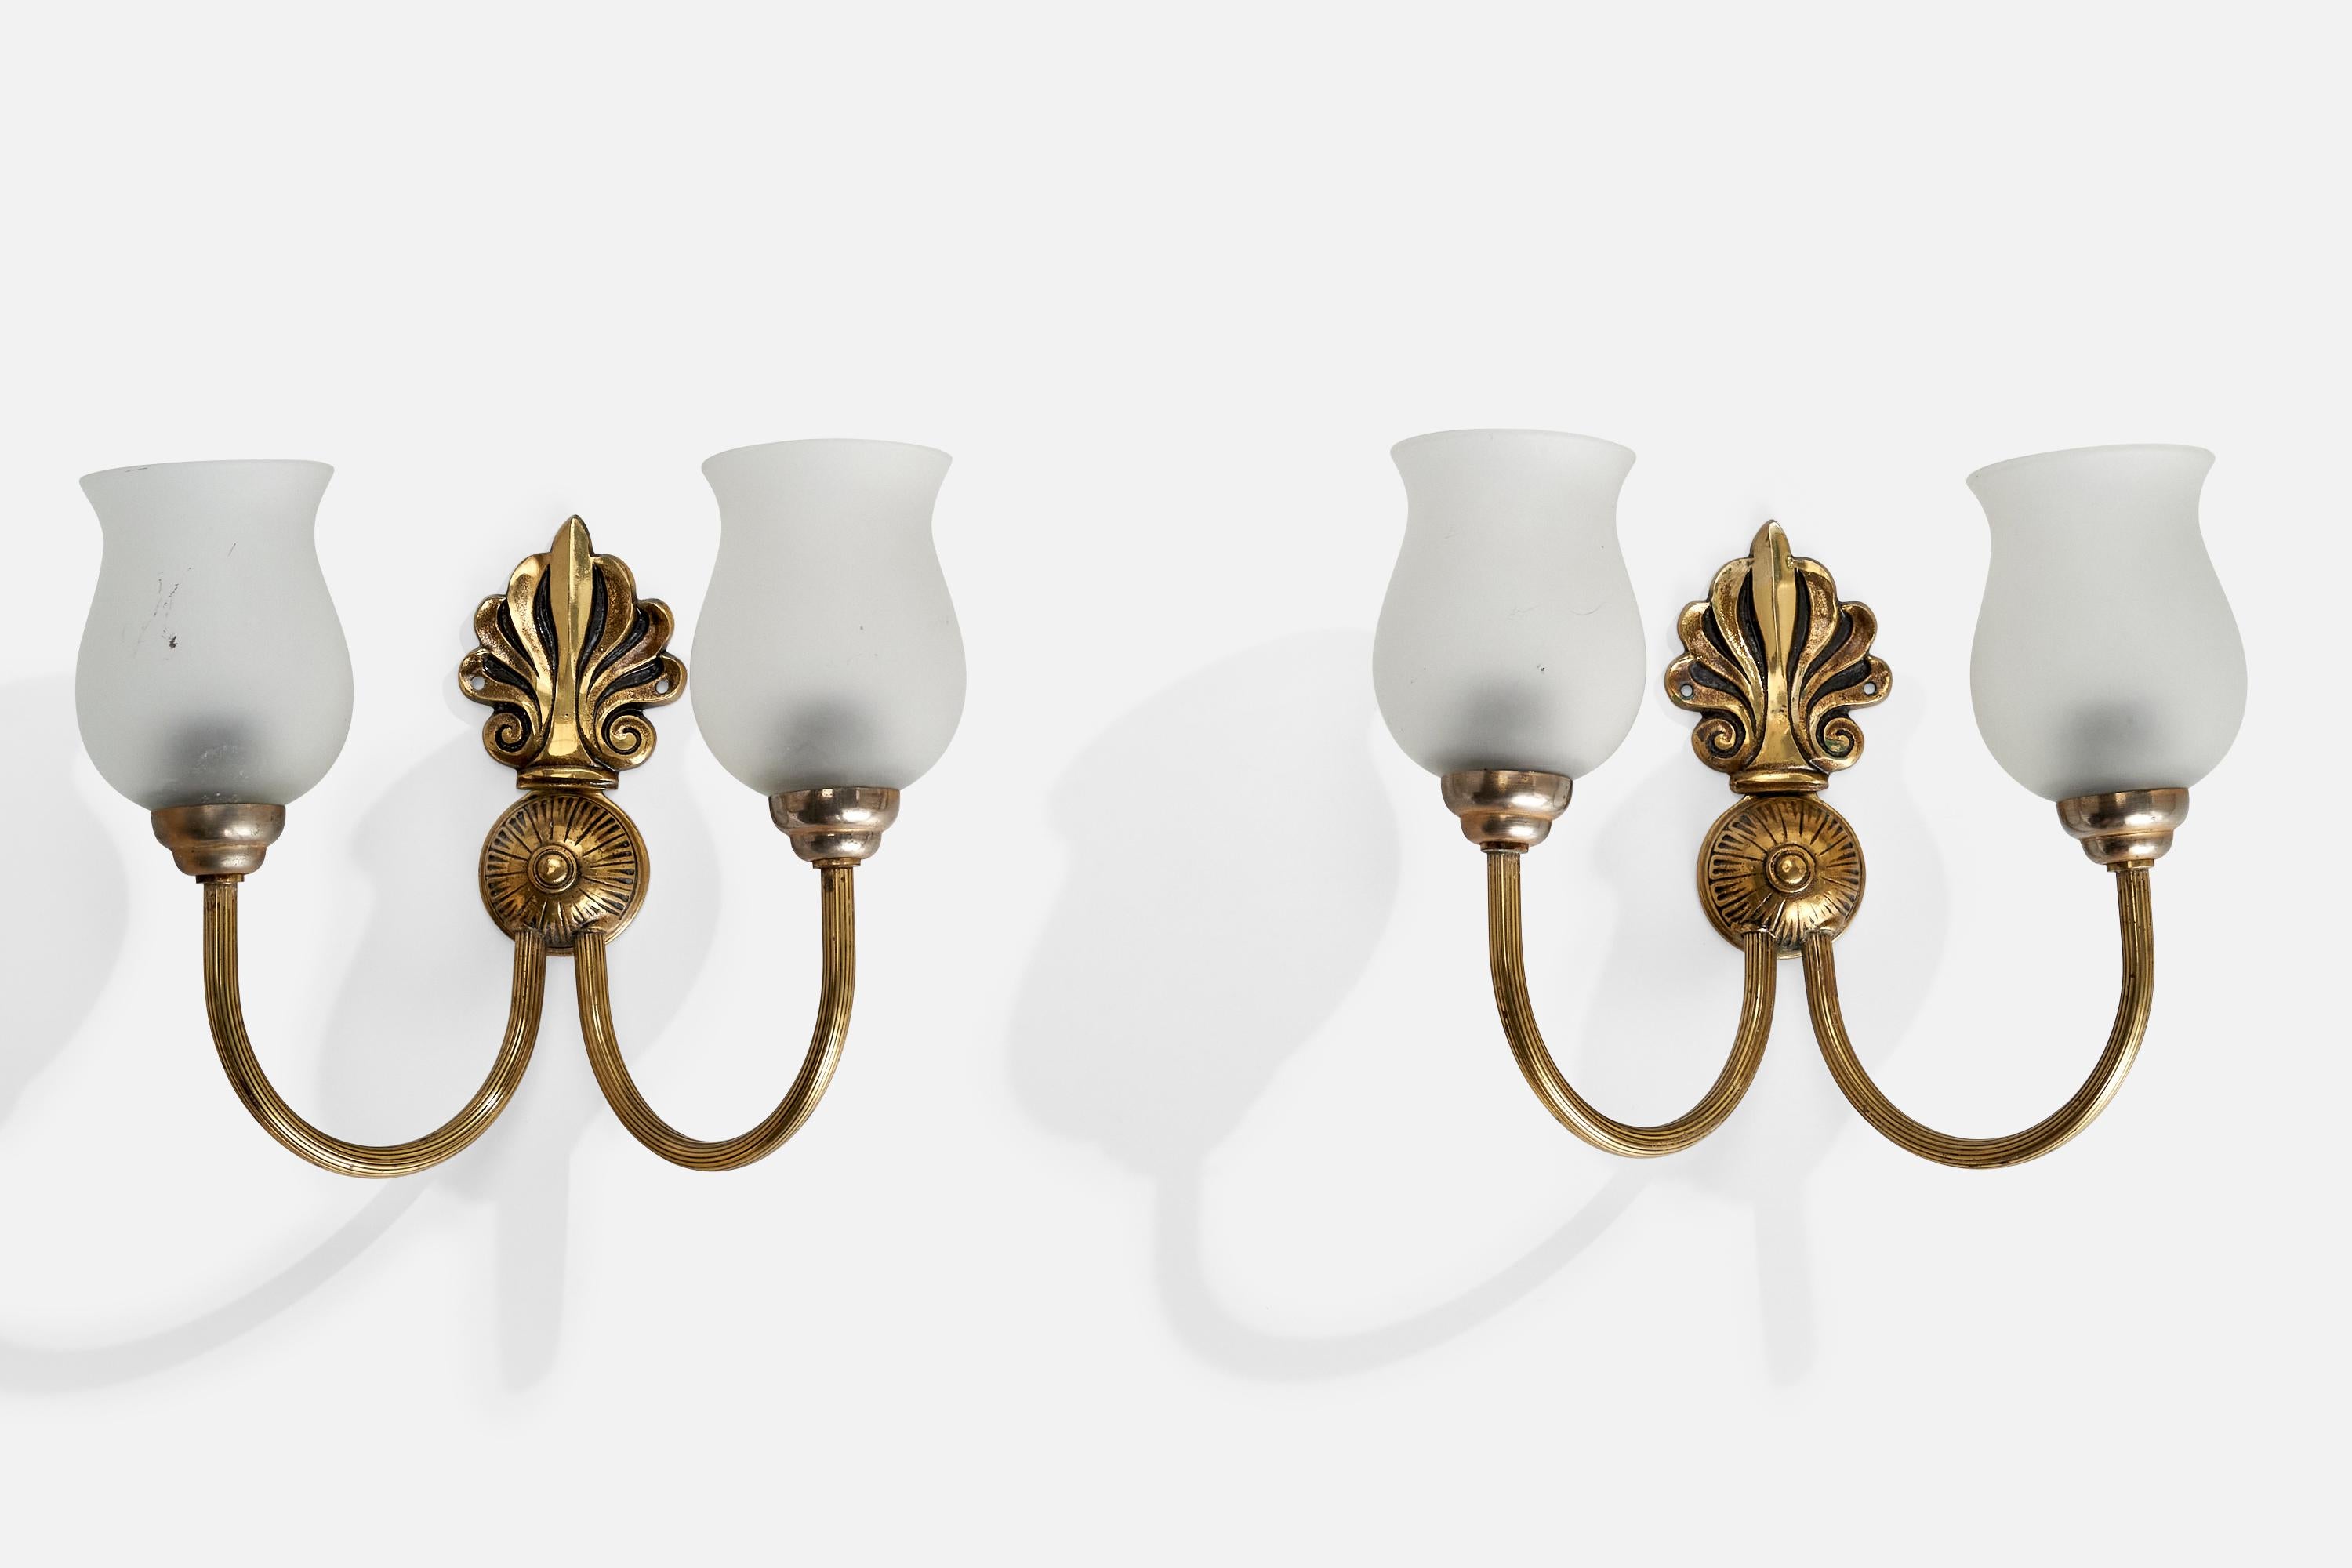 A pair of brass and frosted glass wall lights designed and produced in France, 1950s.

Overall Dimensions (inches): 8.5